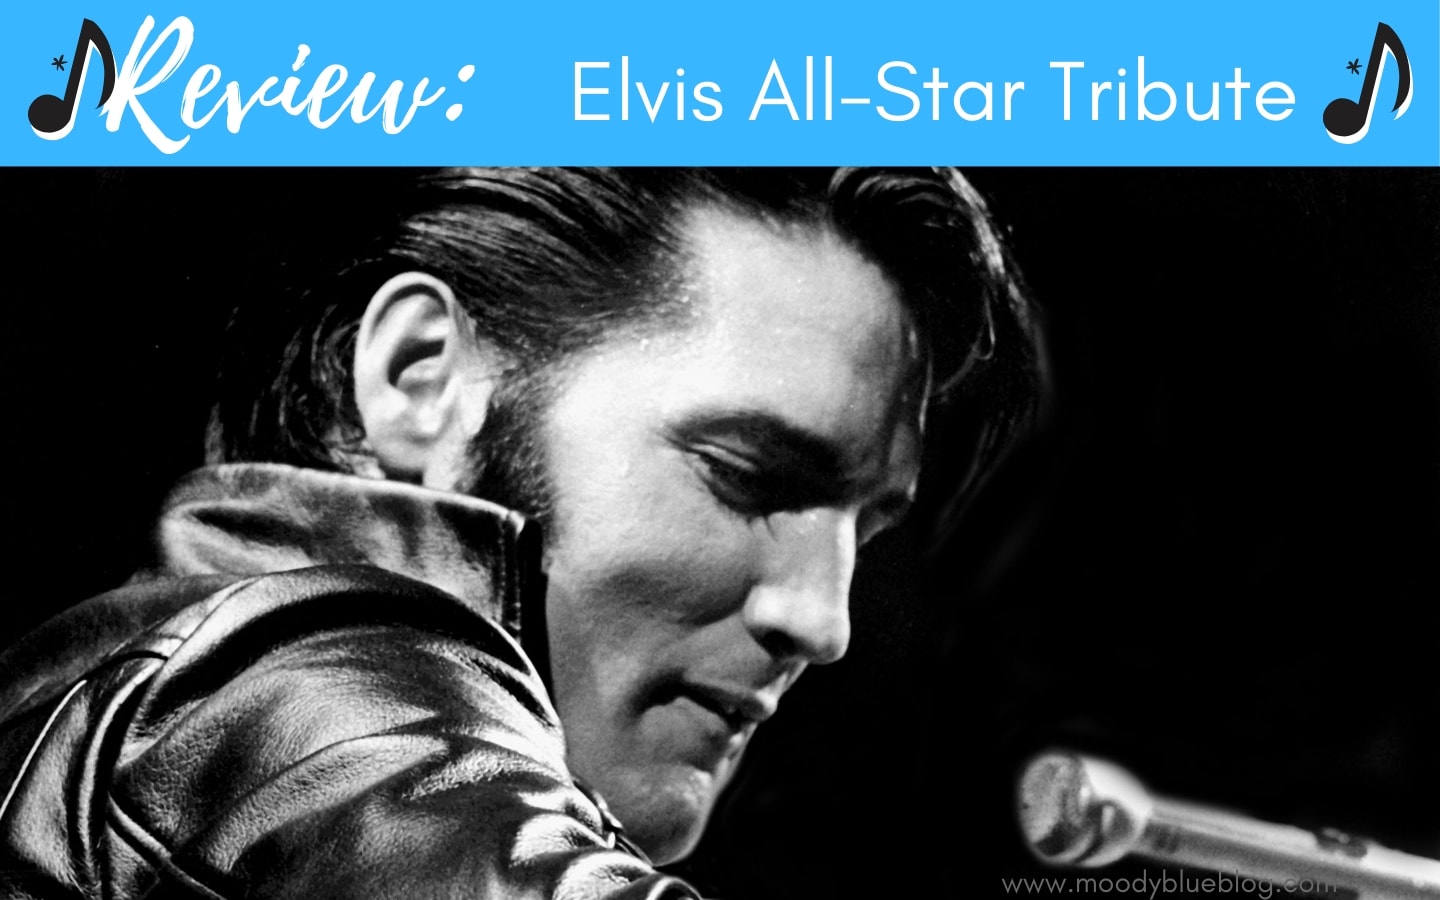 Review: Elvis All-Star Tribute Facebook